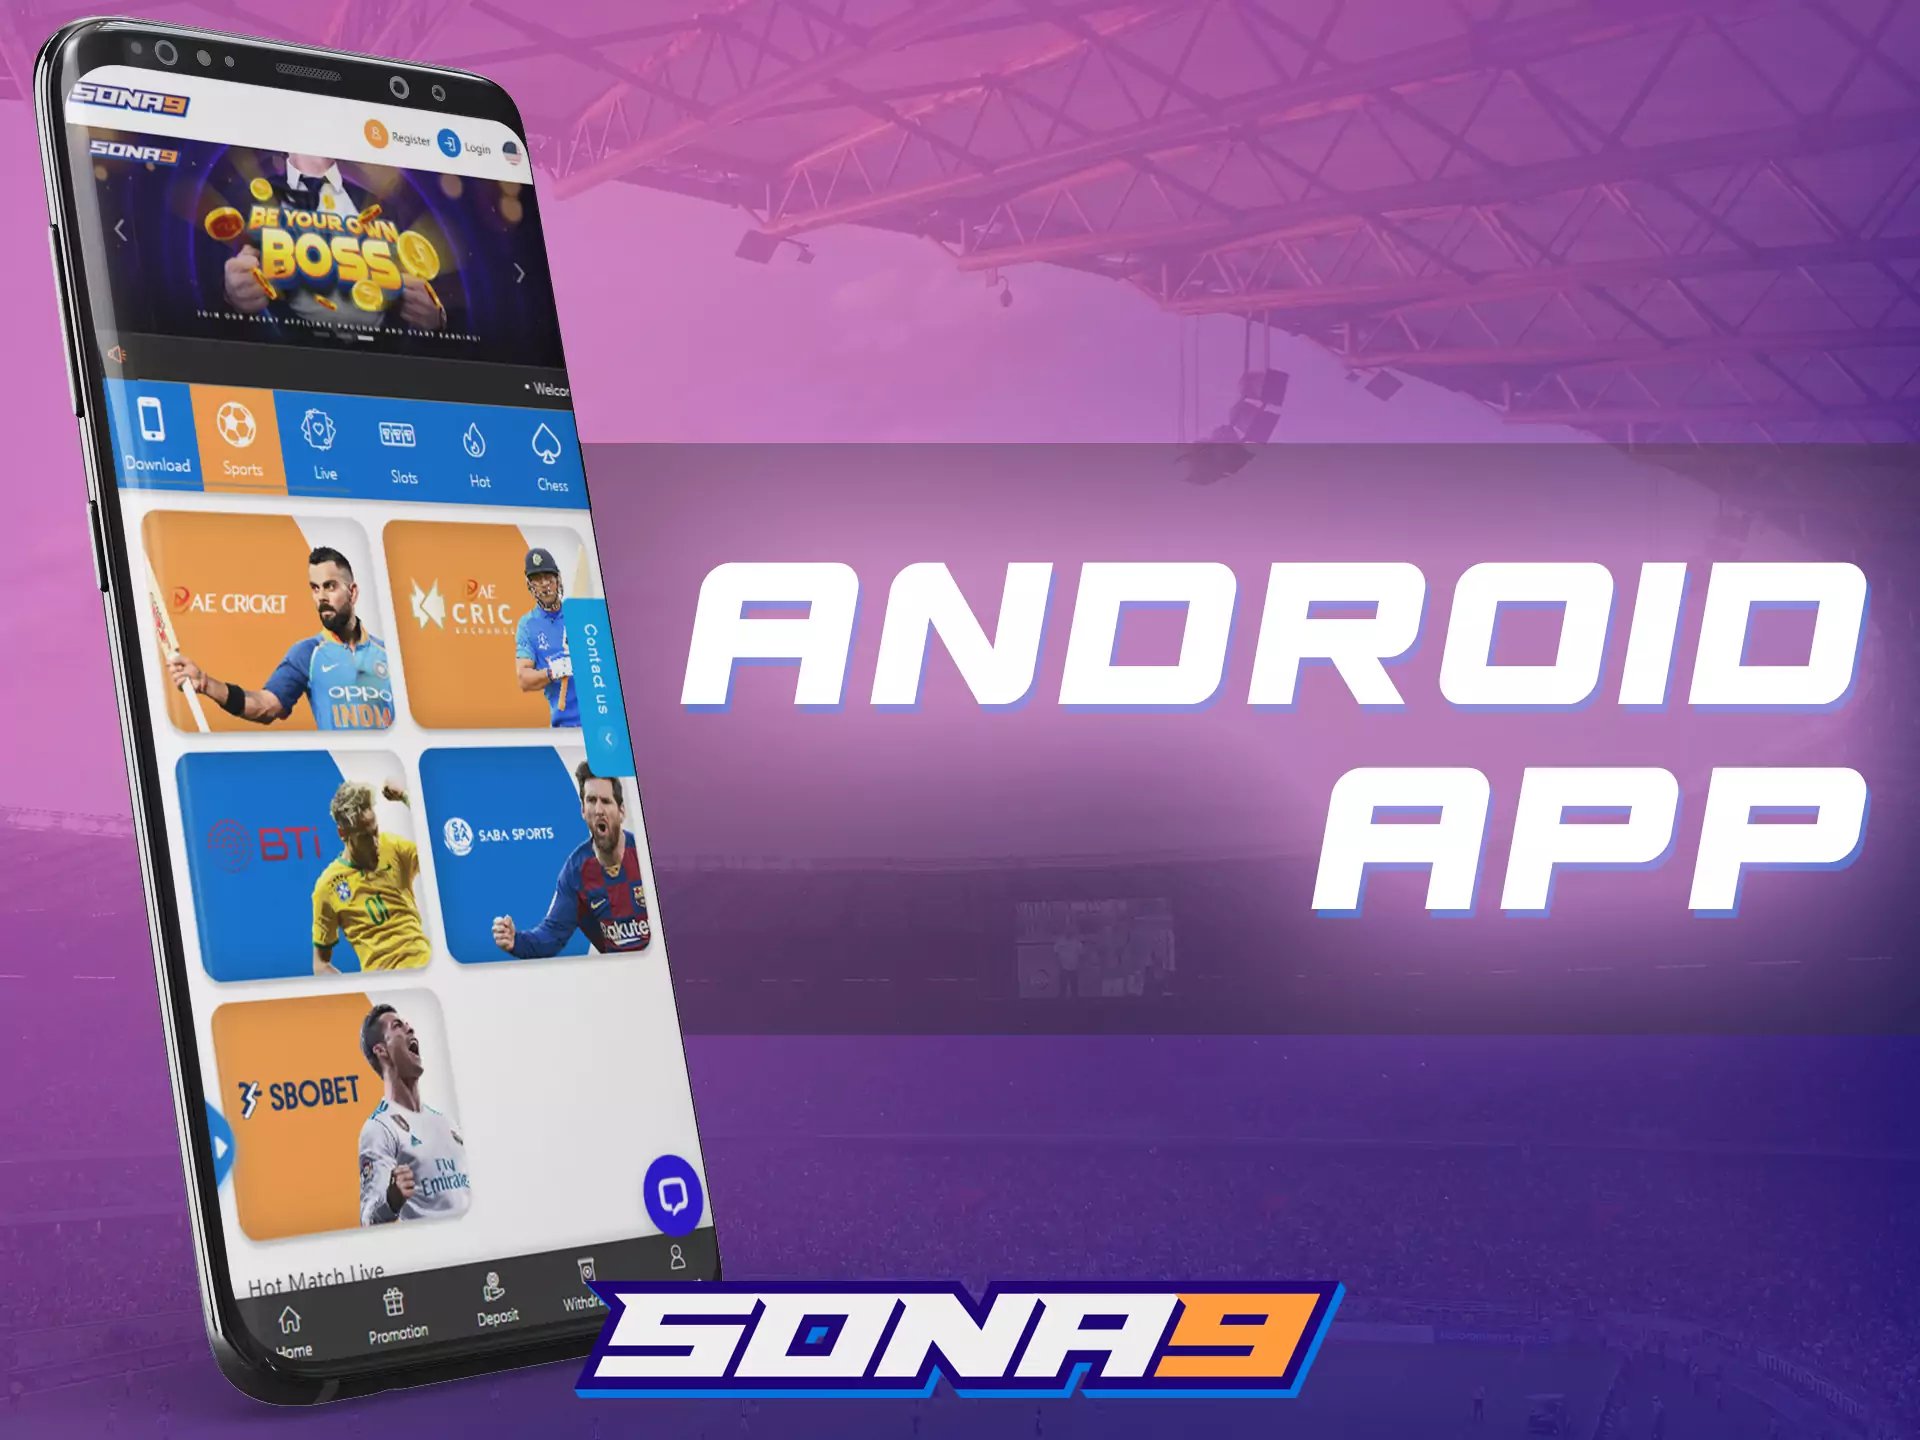 Download the Sona9 application for Android devices.